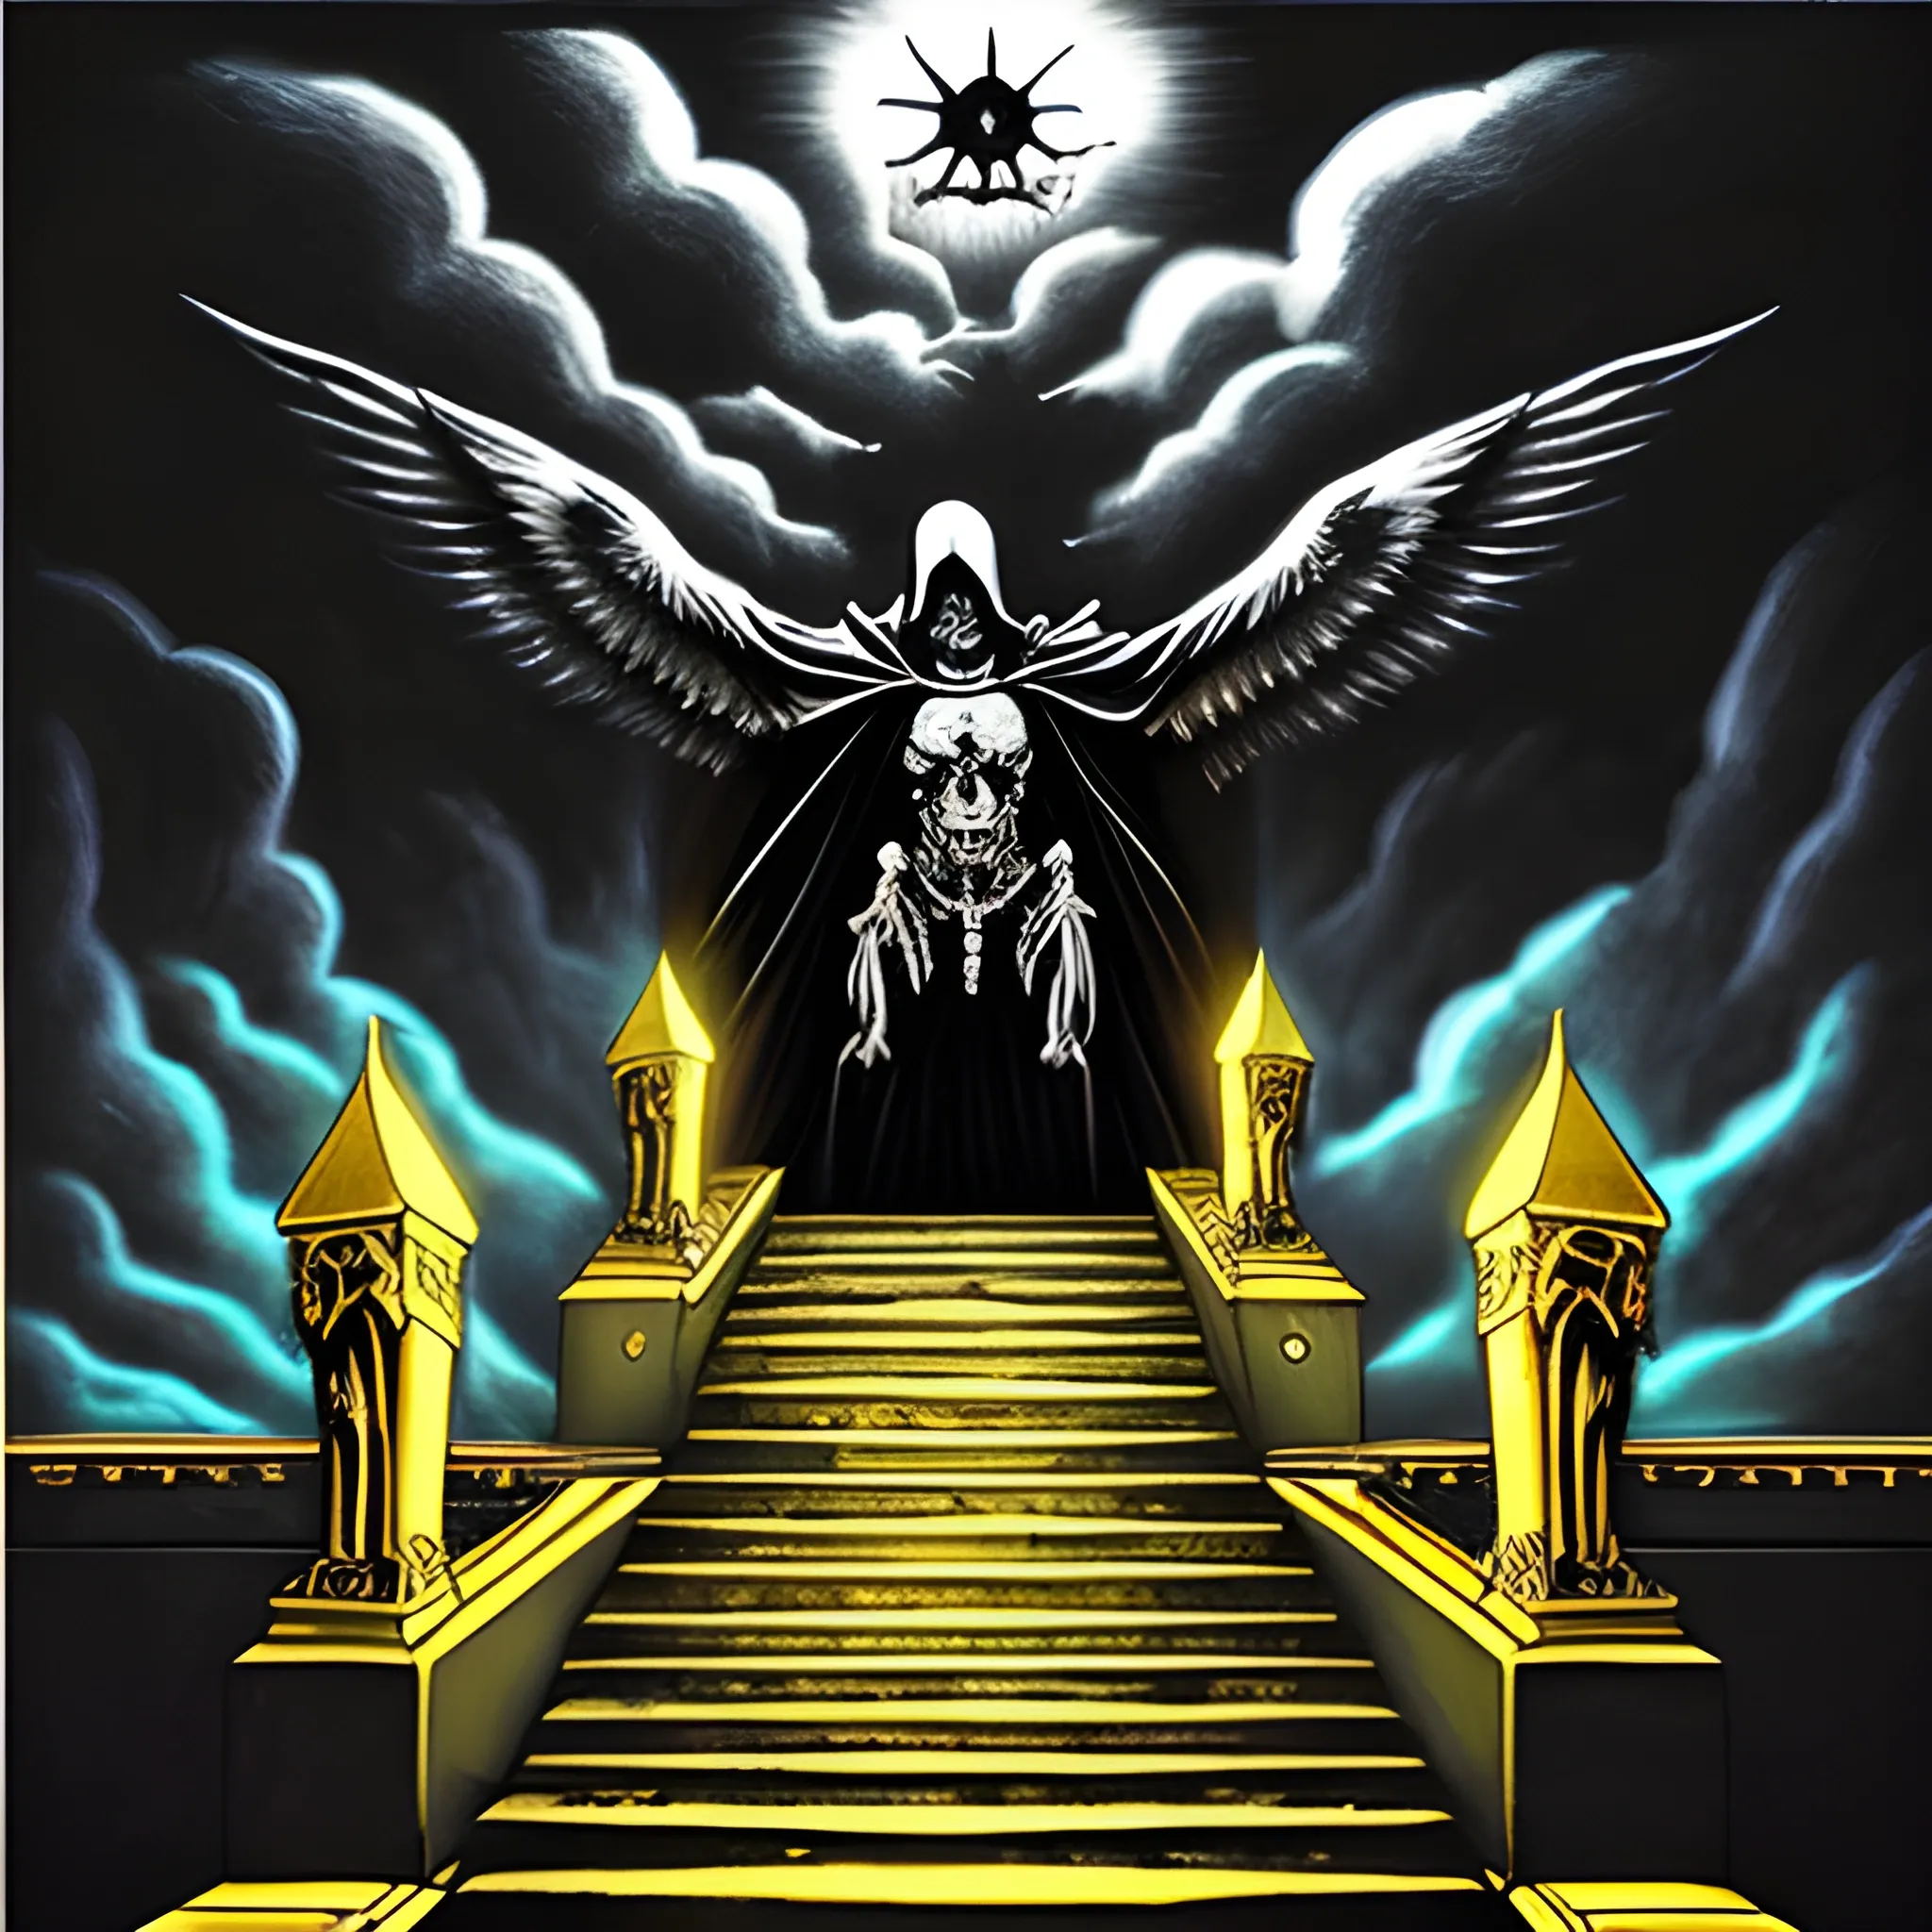 Death climbing the stairs to heaven on his back. Death has the cape and a black hood. The sky has many clouds and a flash of light, and the doors are golden
